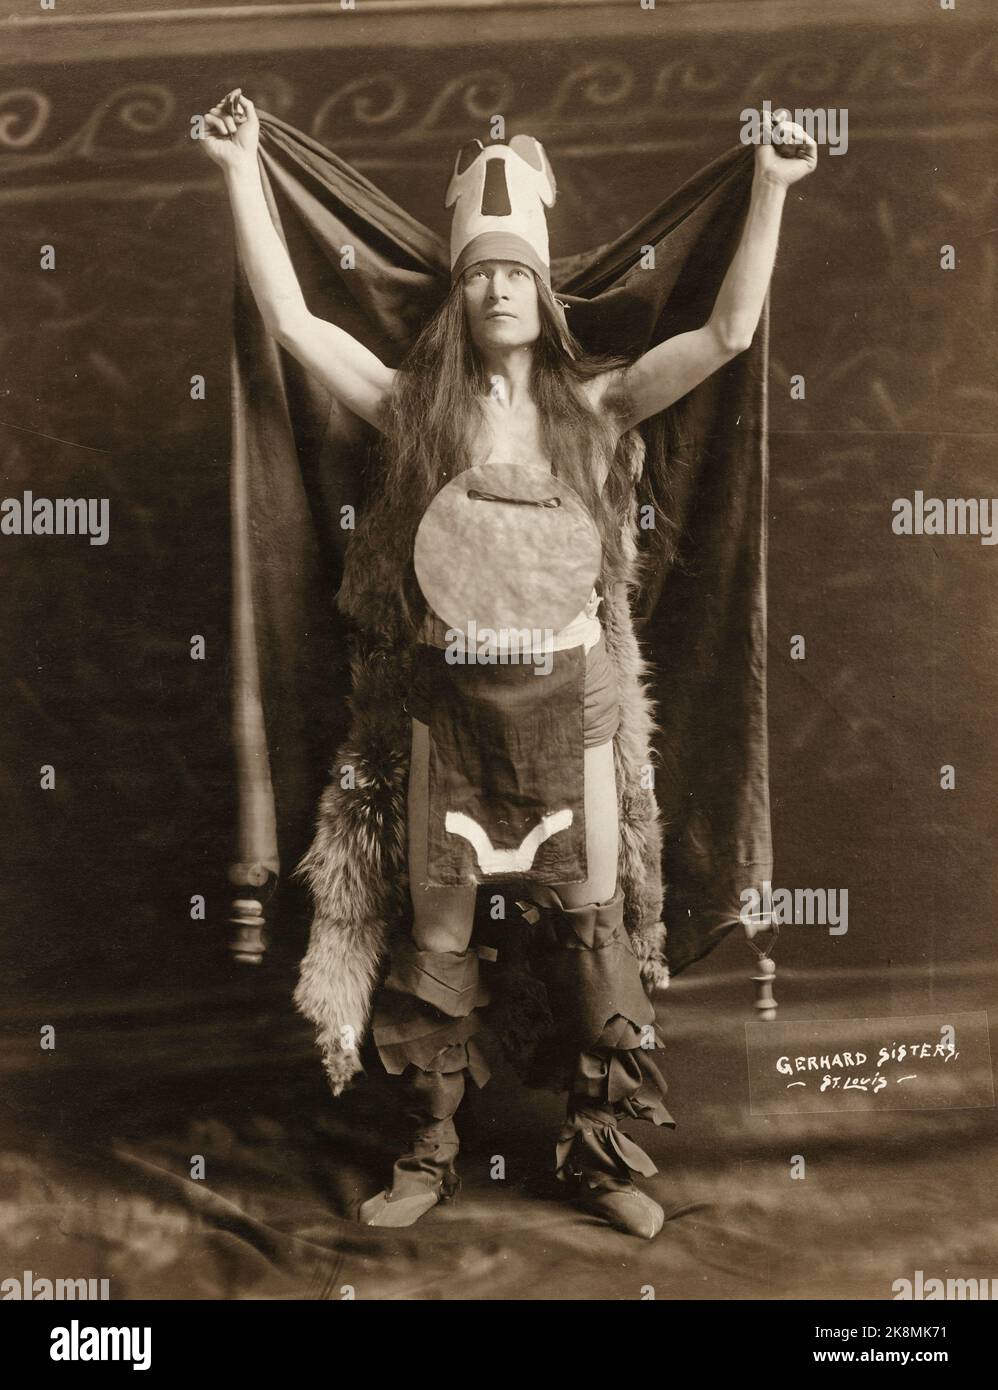 Gerhard Sisters - Mound Builder, High Priest - Pageant and Masque performer costumed as an American Indian standing with his arms raised - 1914 Stock Photo